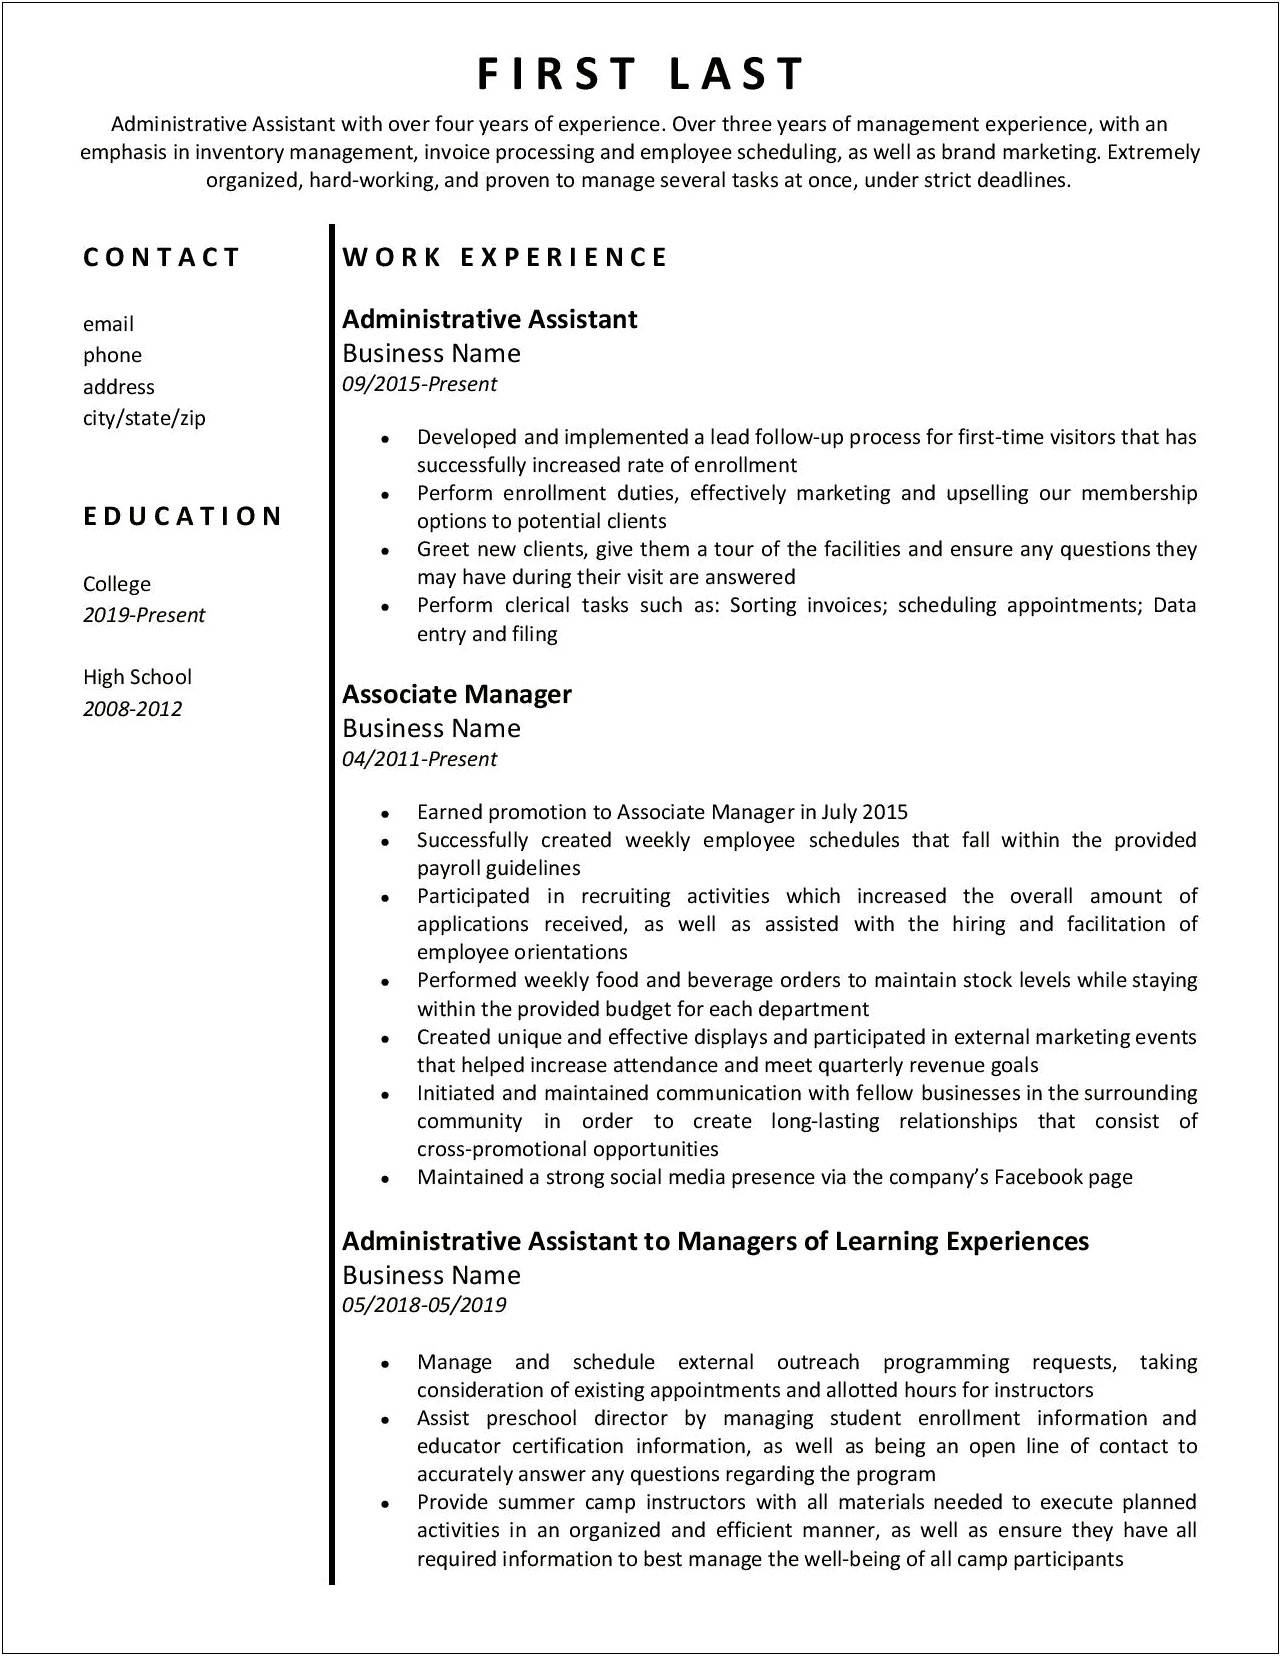 Resume Worked At Same Place Twice